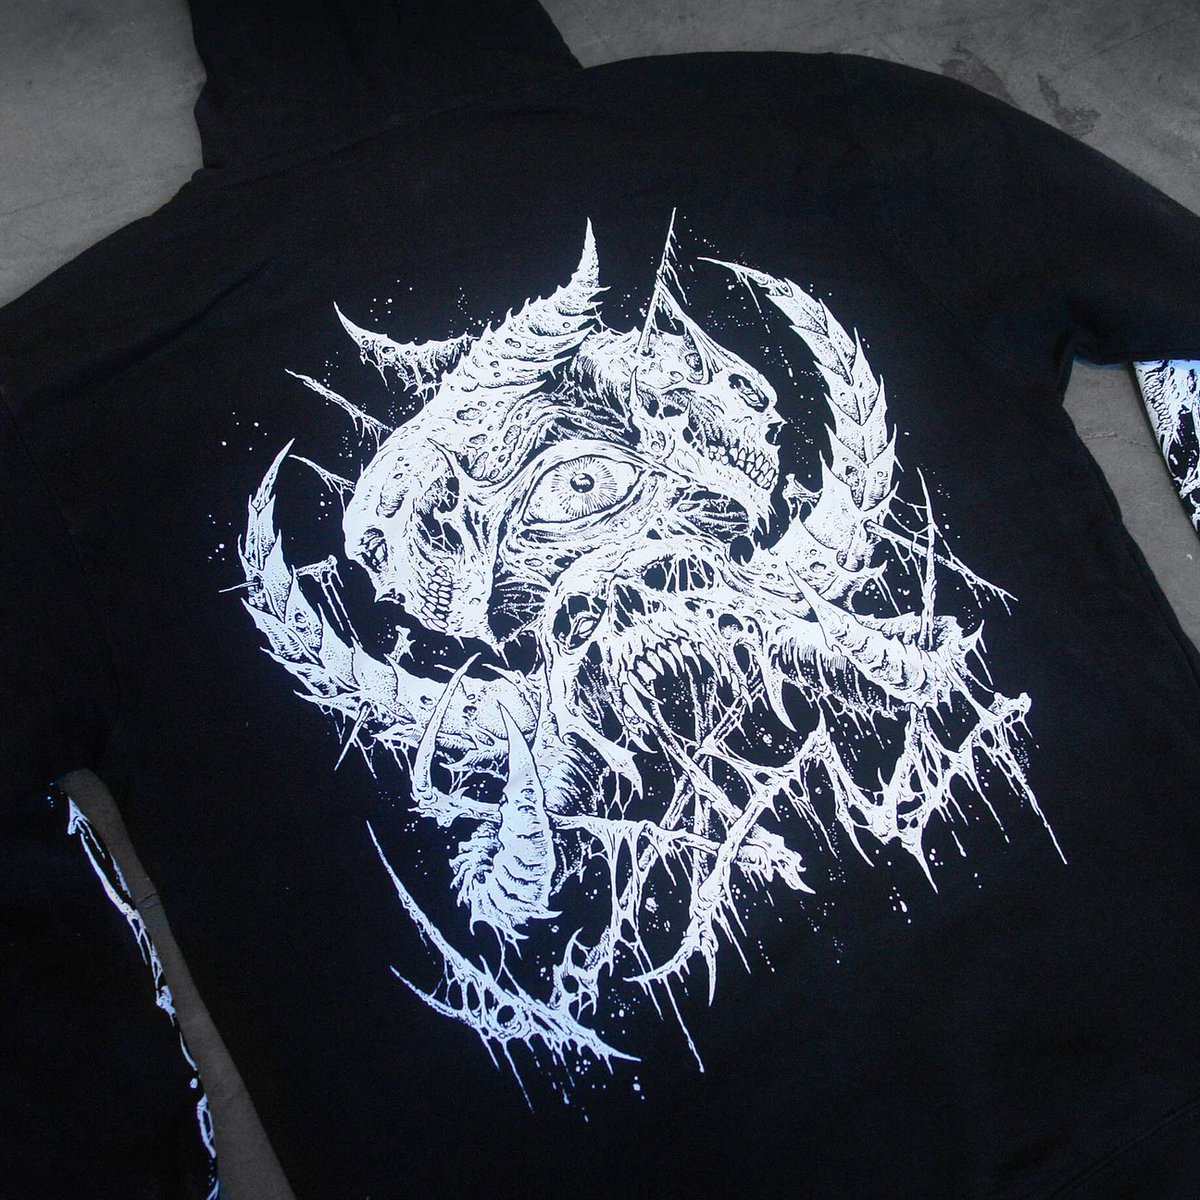 Check out the “Doom” hoodie with artwork and logo by the one and only Mark Riddick (RIDDICKART) Available now in our US and Euro store US: whitechapel.merchnow.com EU: impericon.com/de/search/Whit…